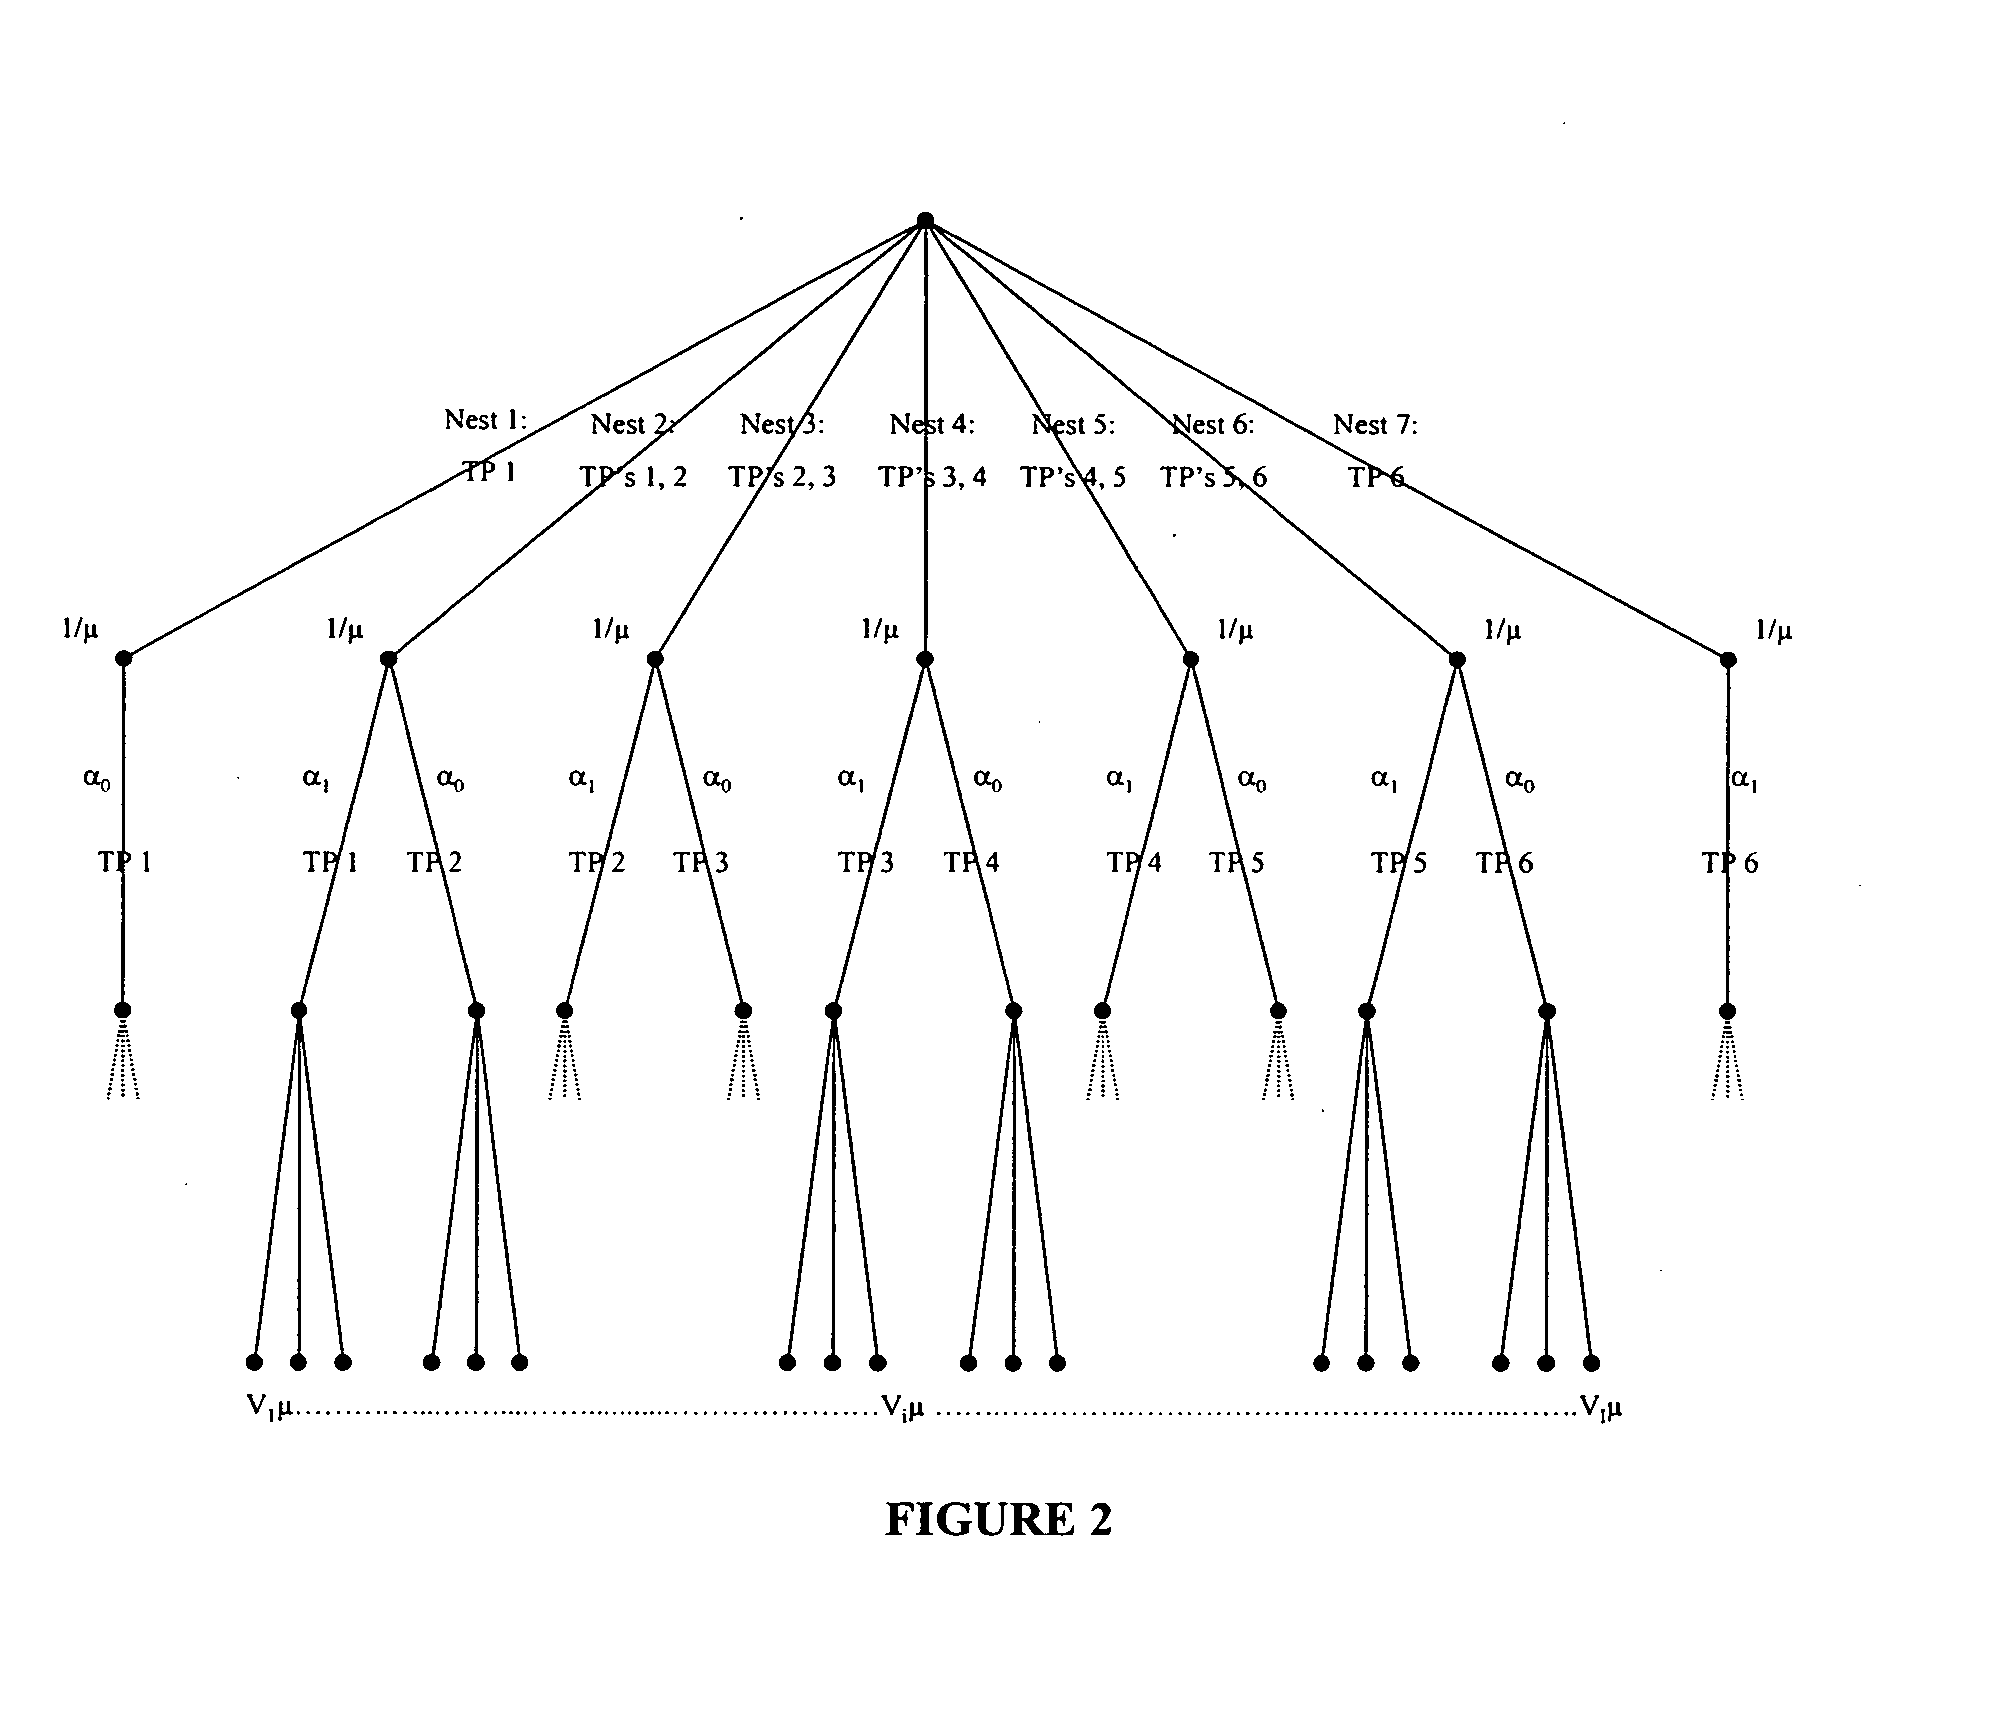 System and method for modeling consumer choice behavior